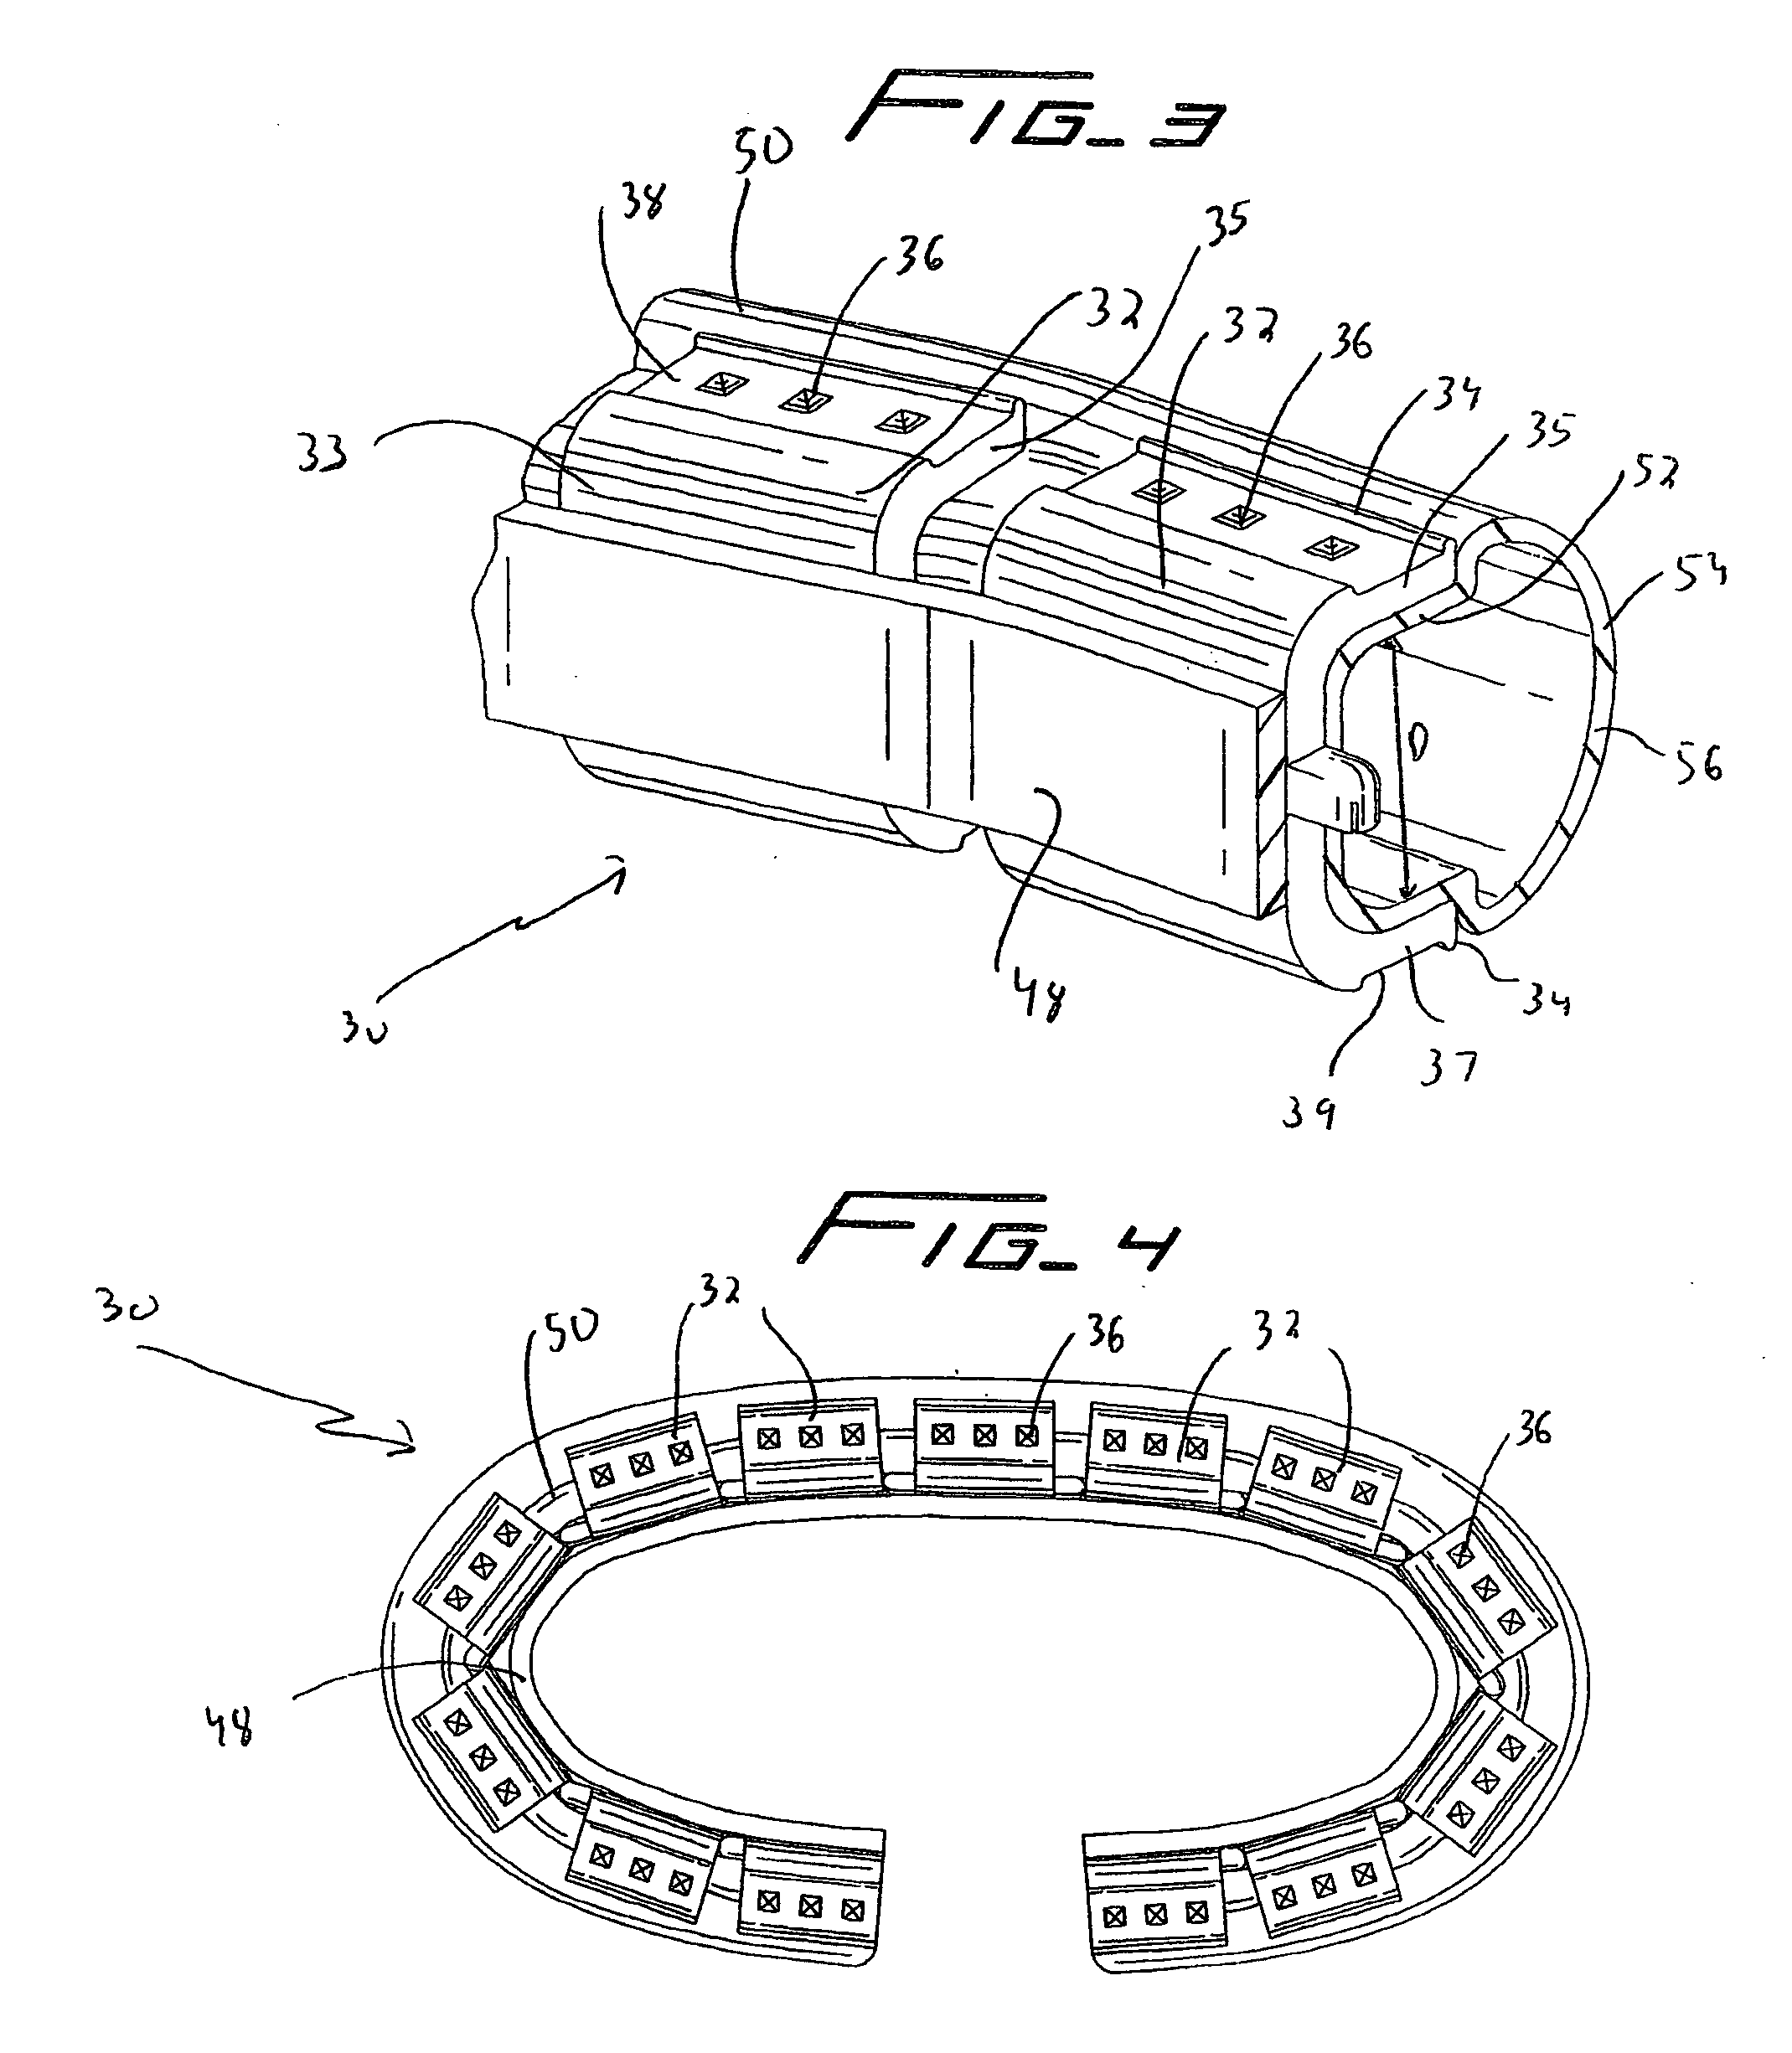 Spinal implant and method of use